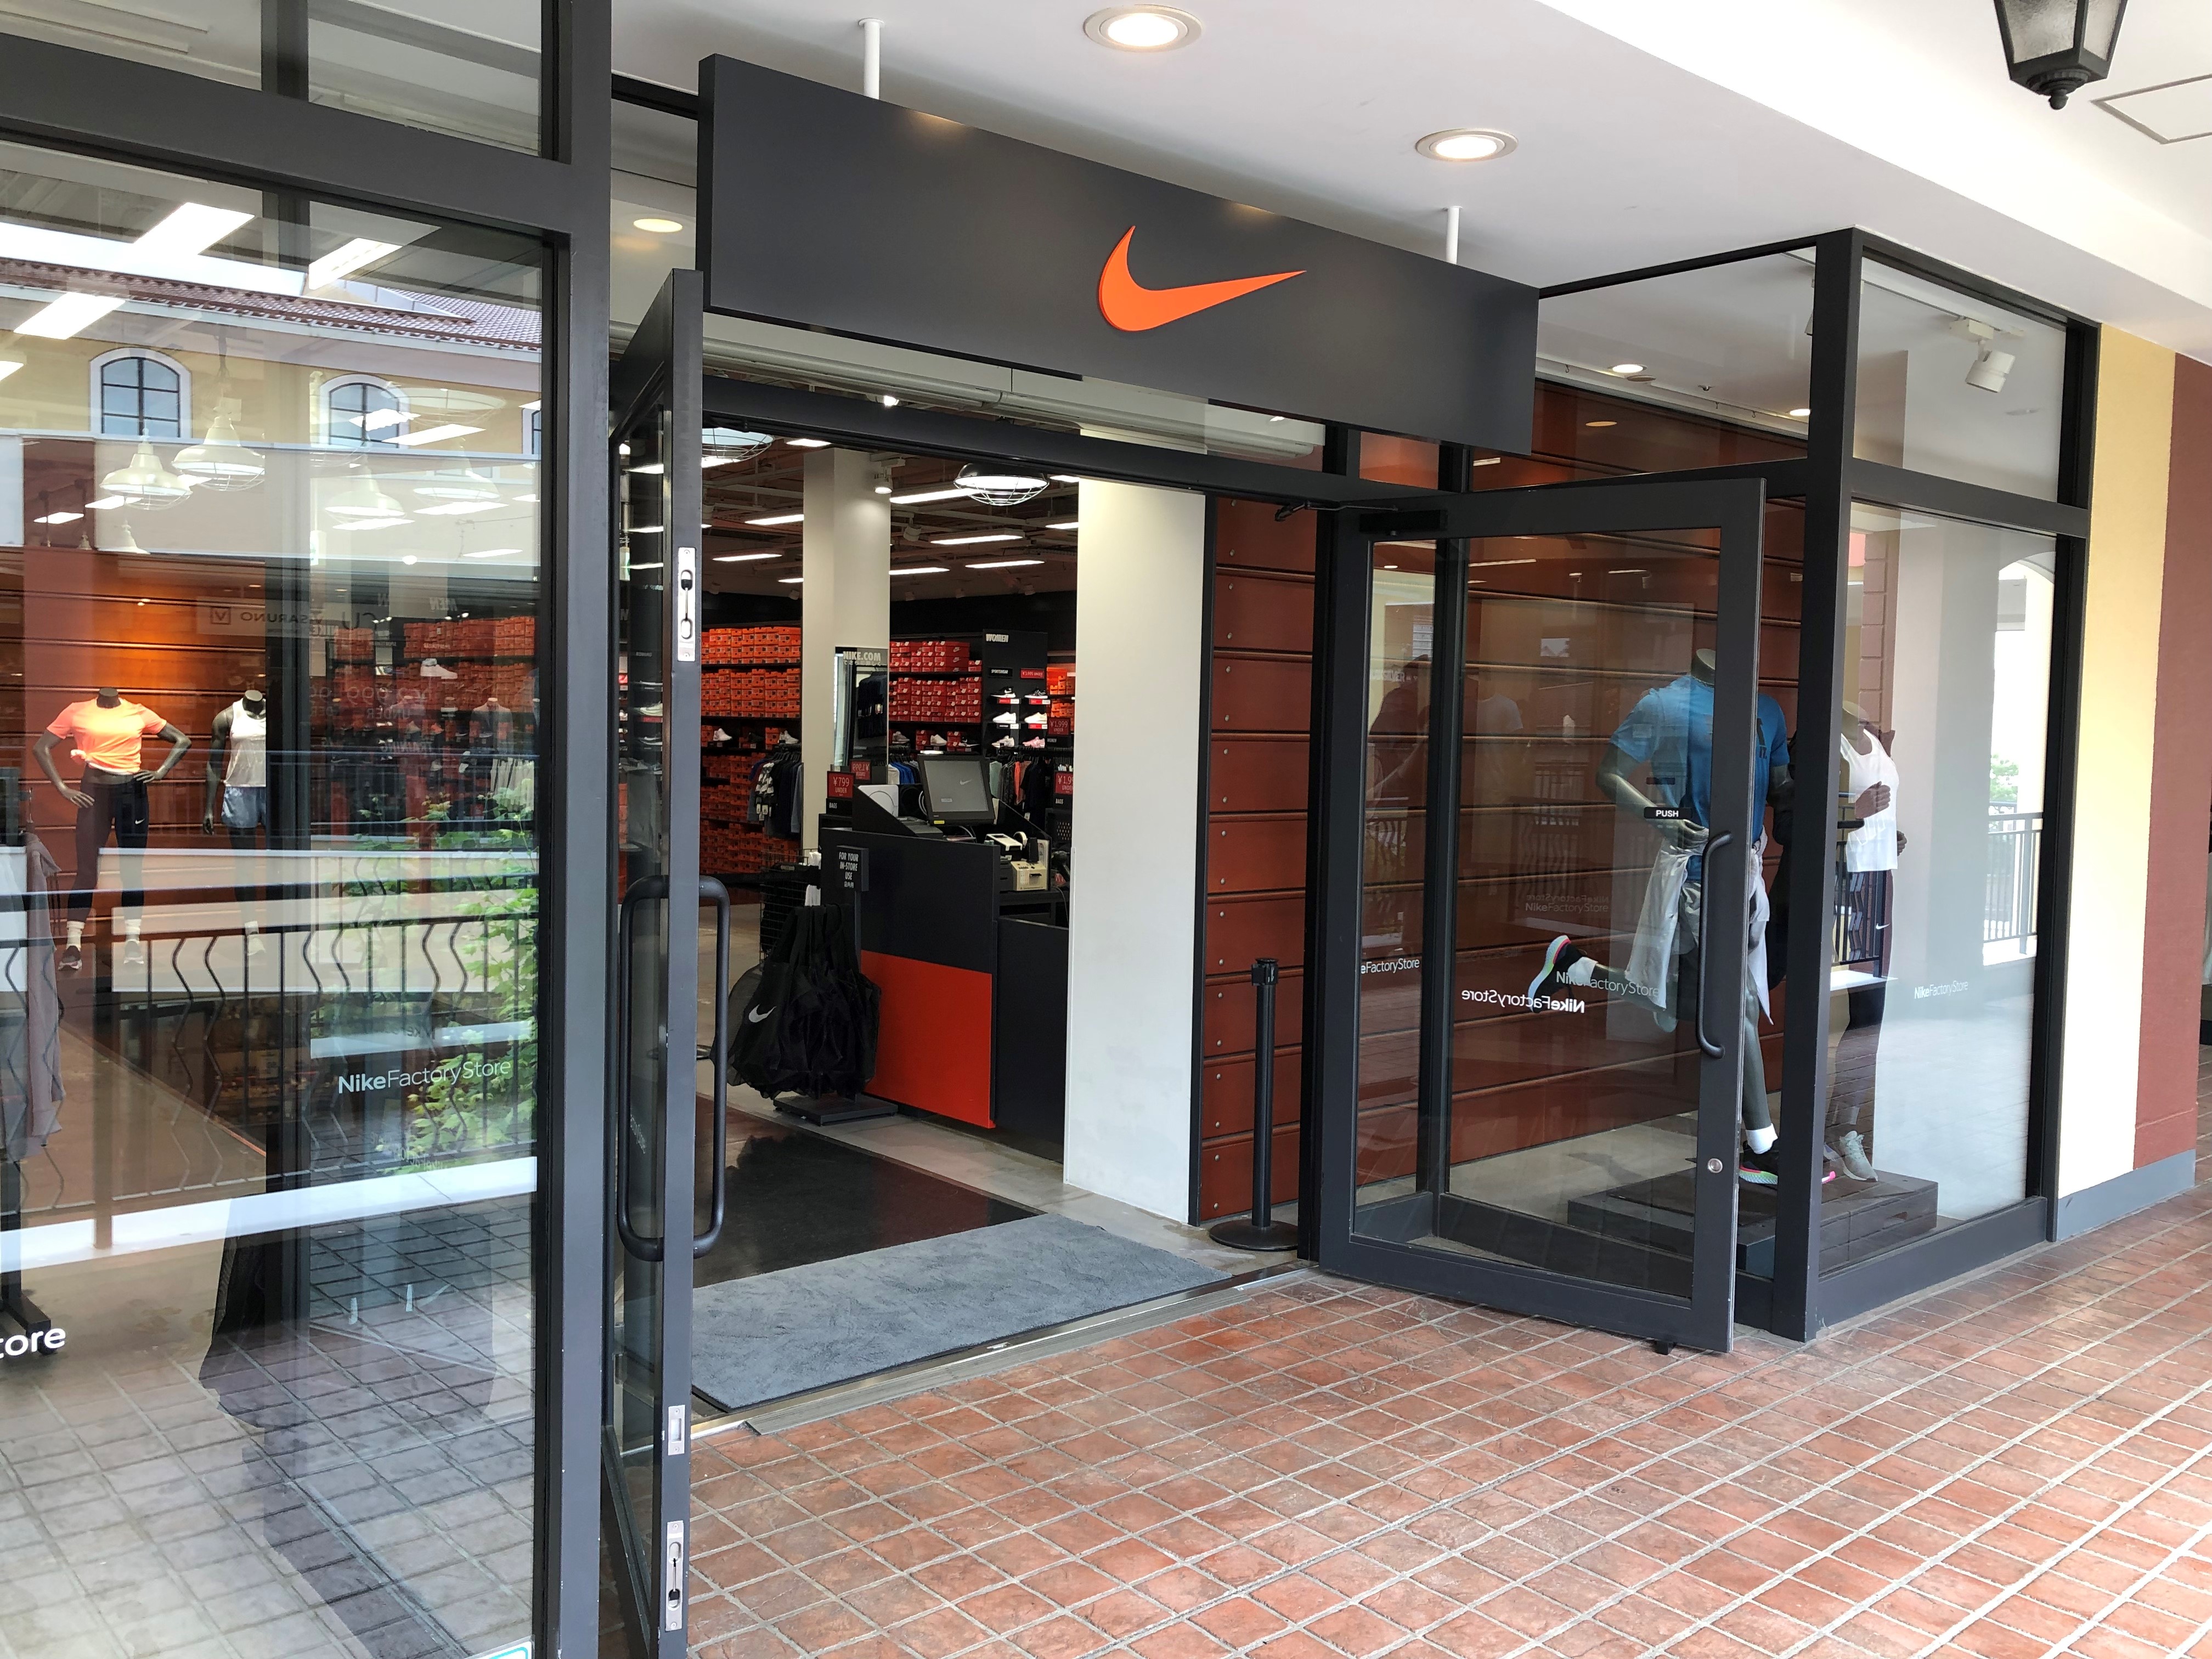 Nike Factory Store 三井アウトレットパーク 多摩南大沢